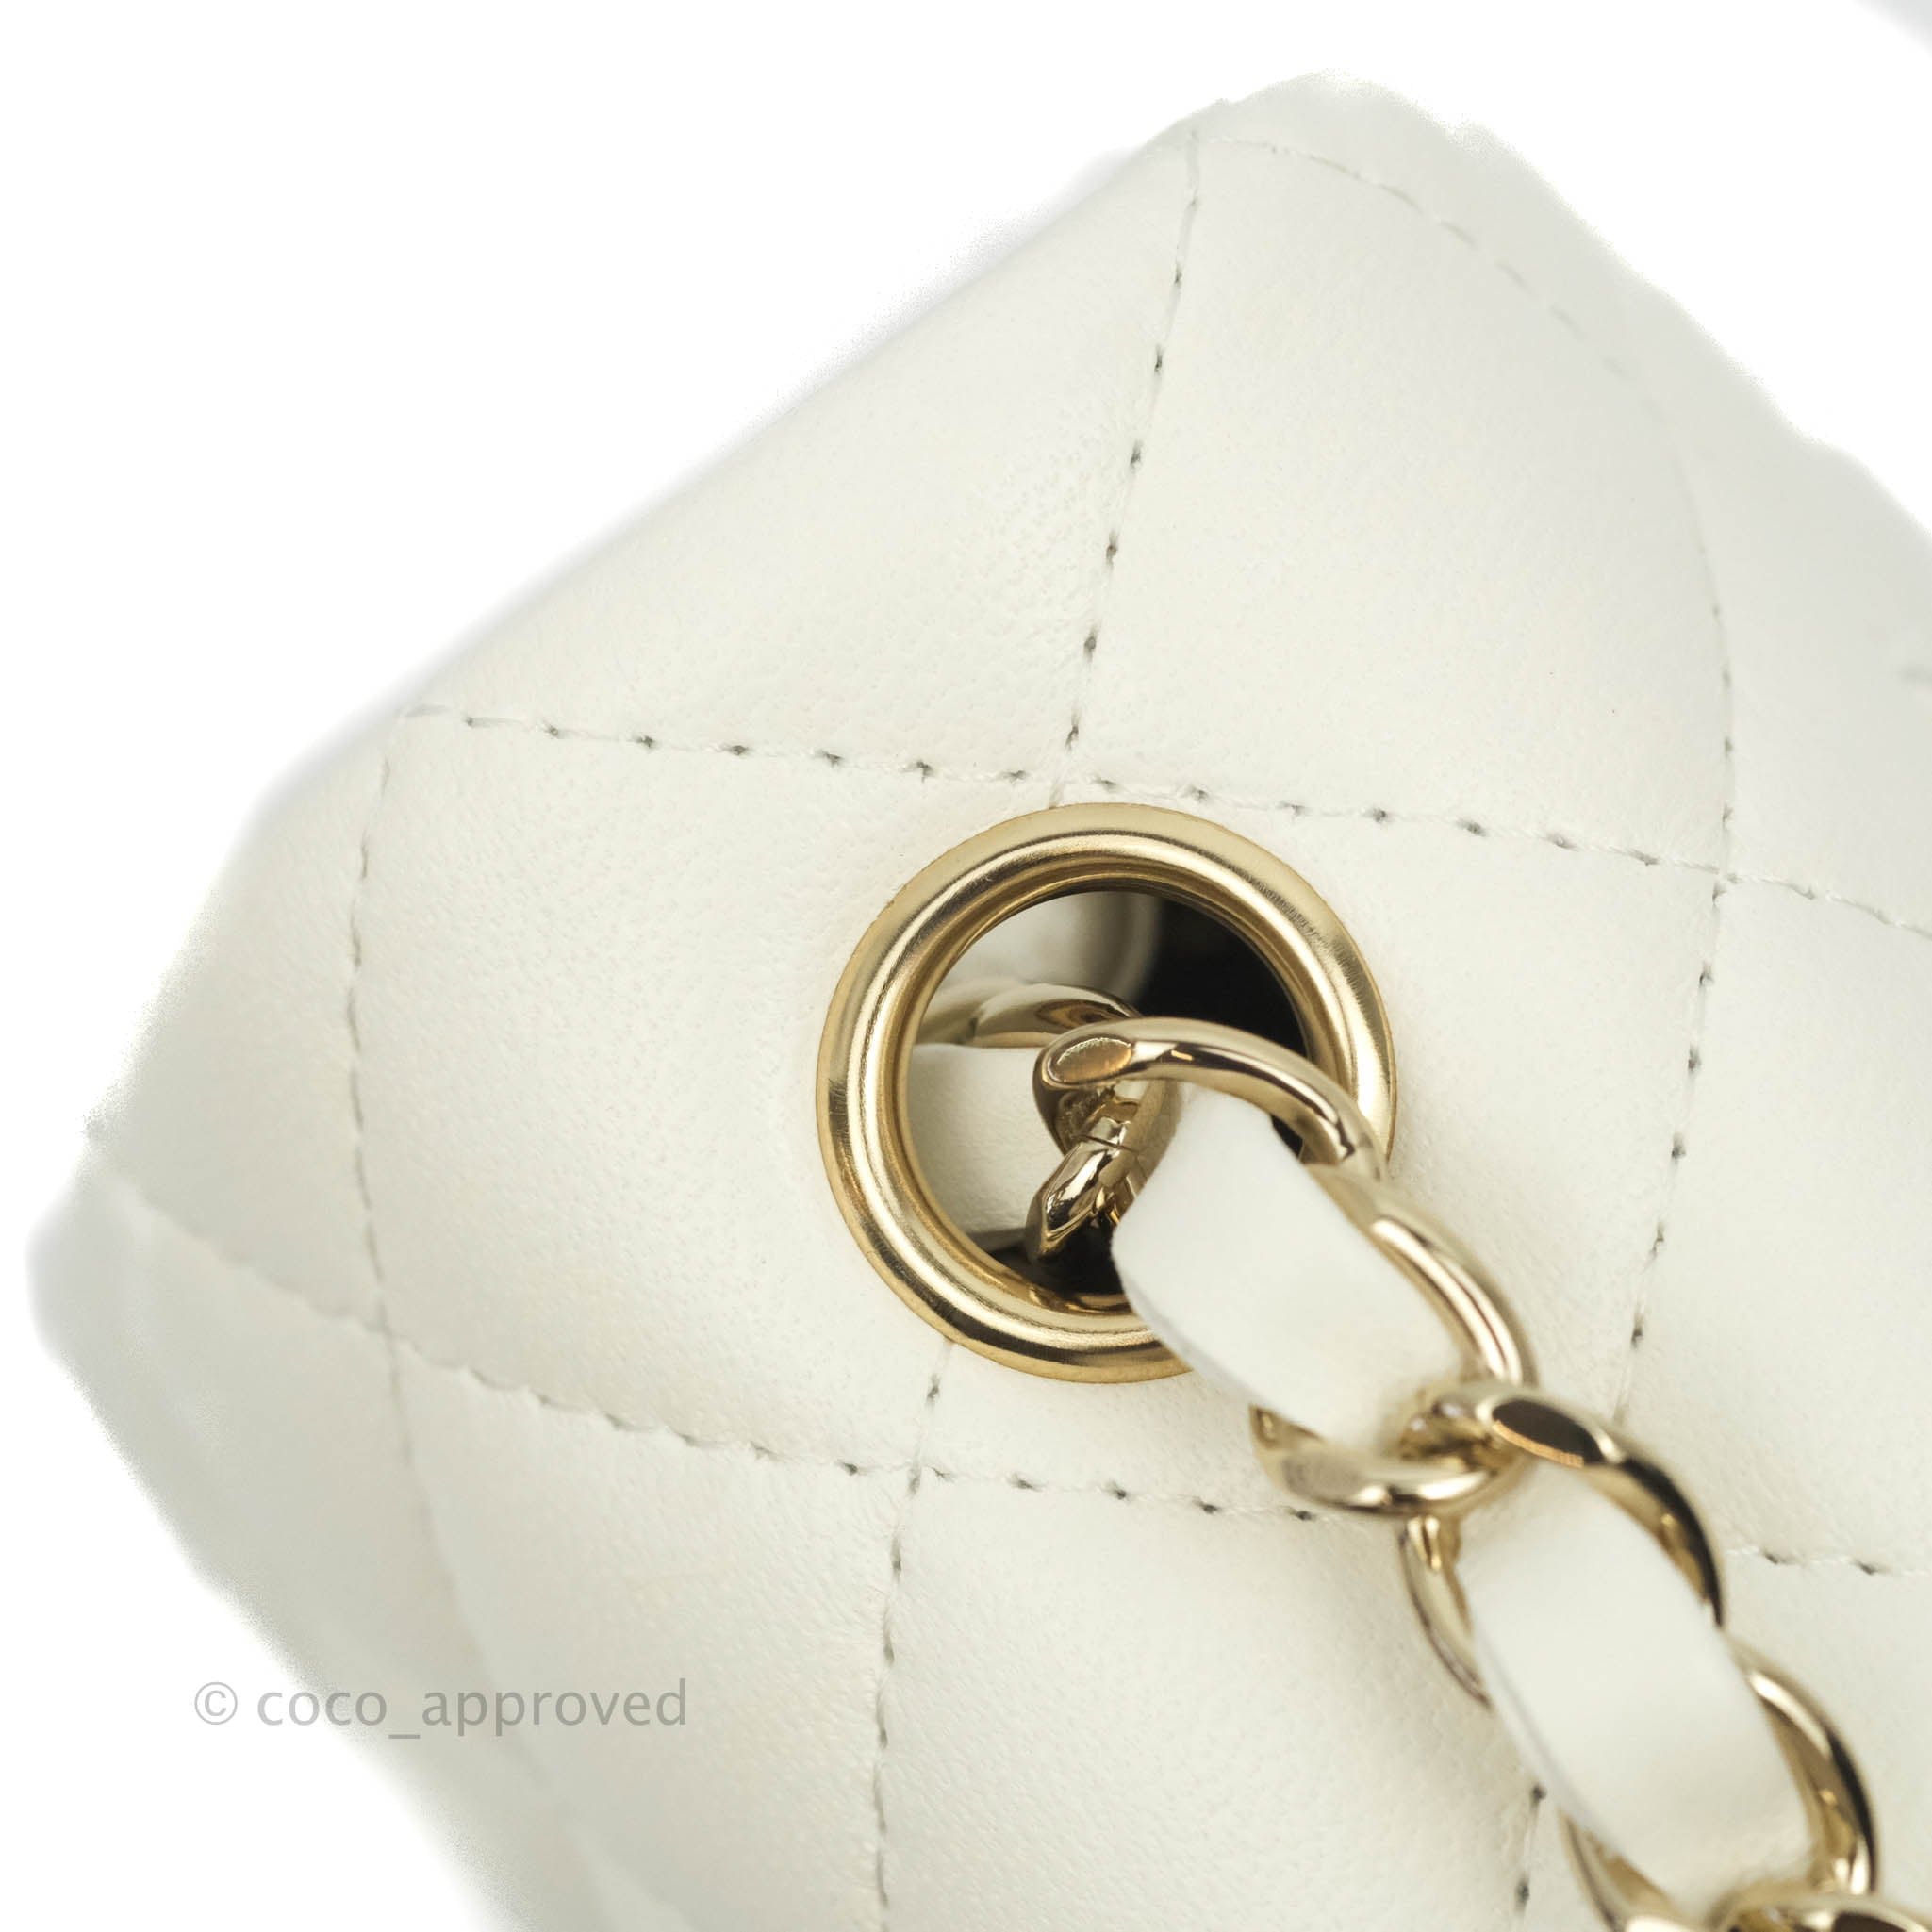 Chanel Quilted Mini Rectangular Flap White Lambskin Gold Hardware